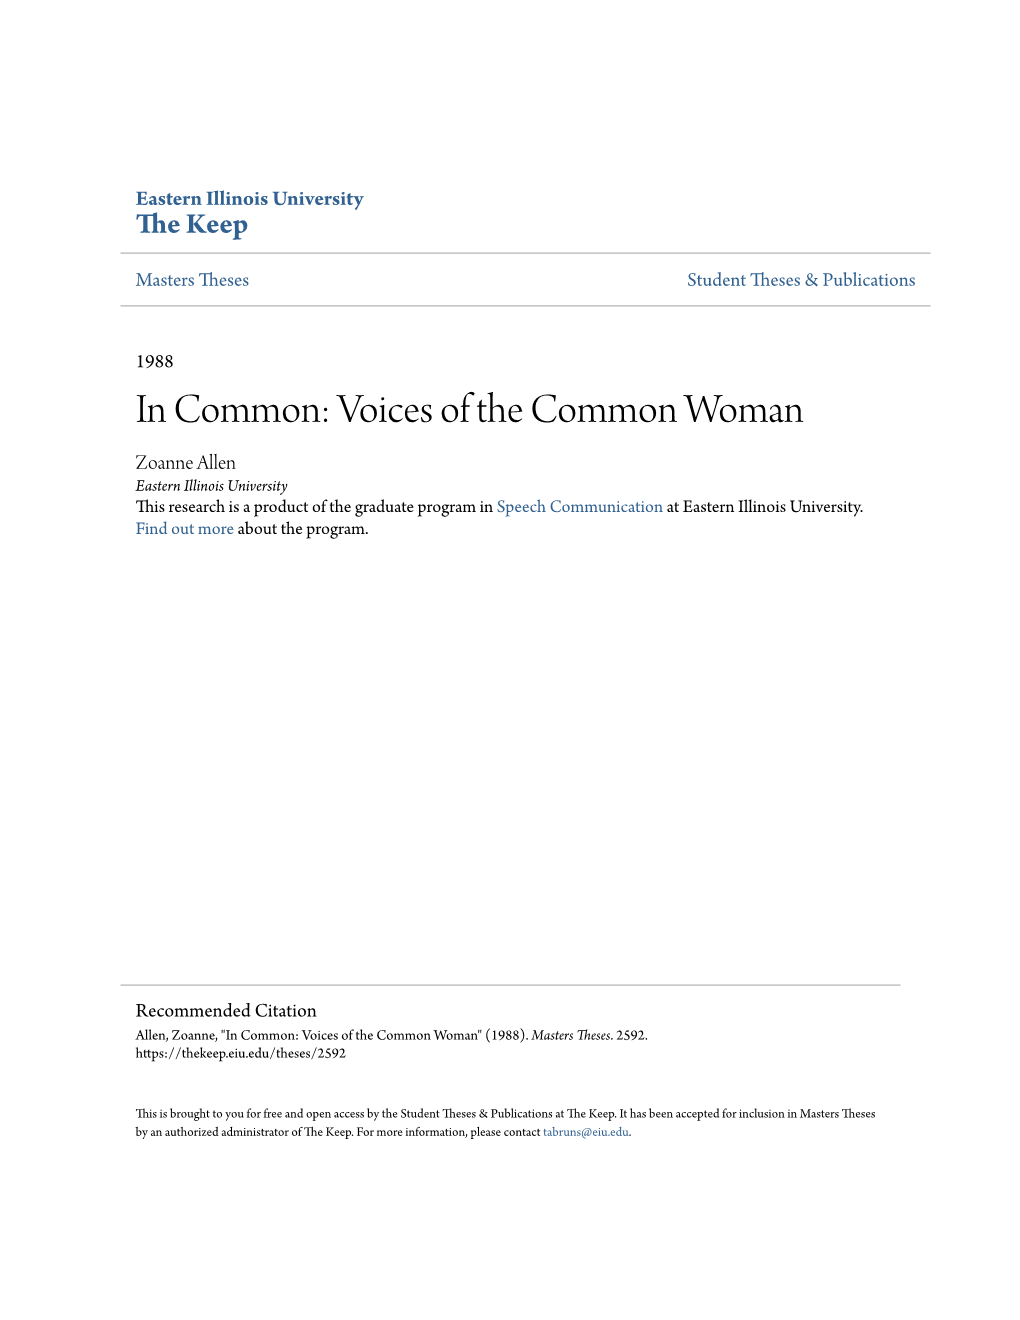 In Common: Voices of the Common Woman